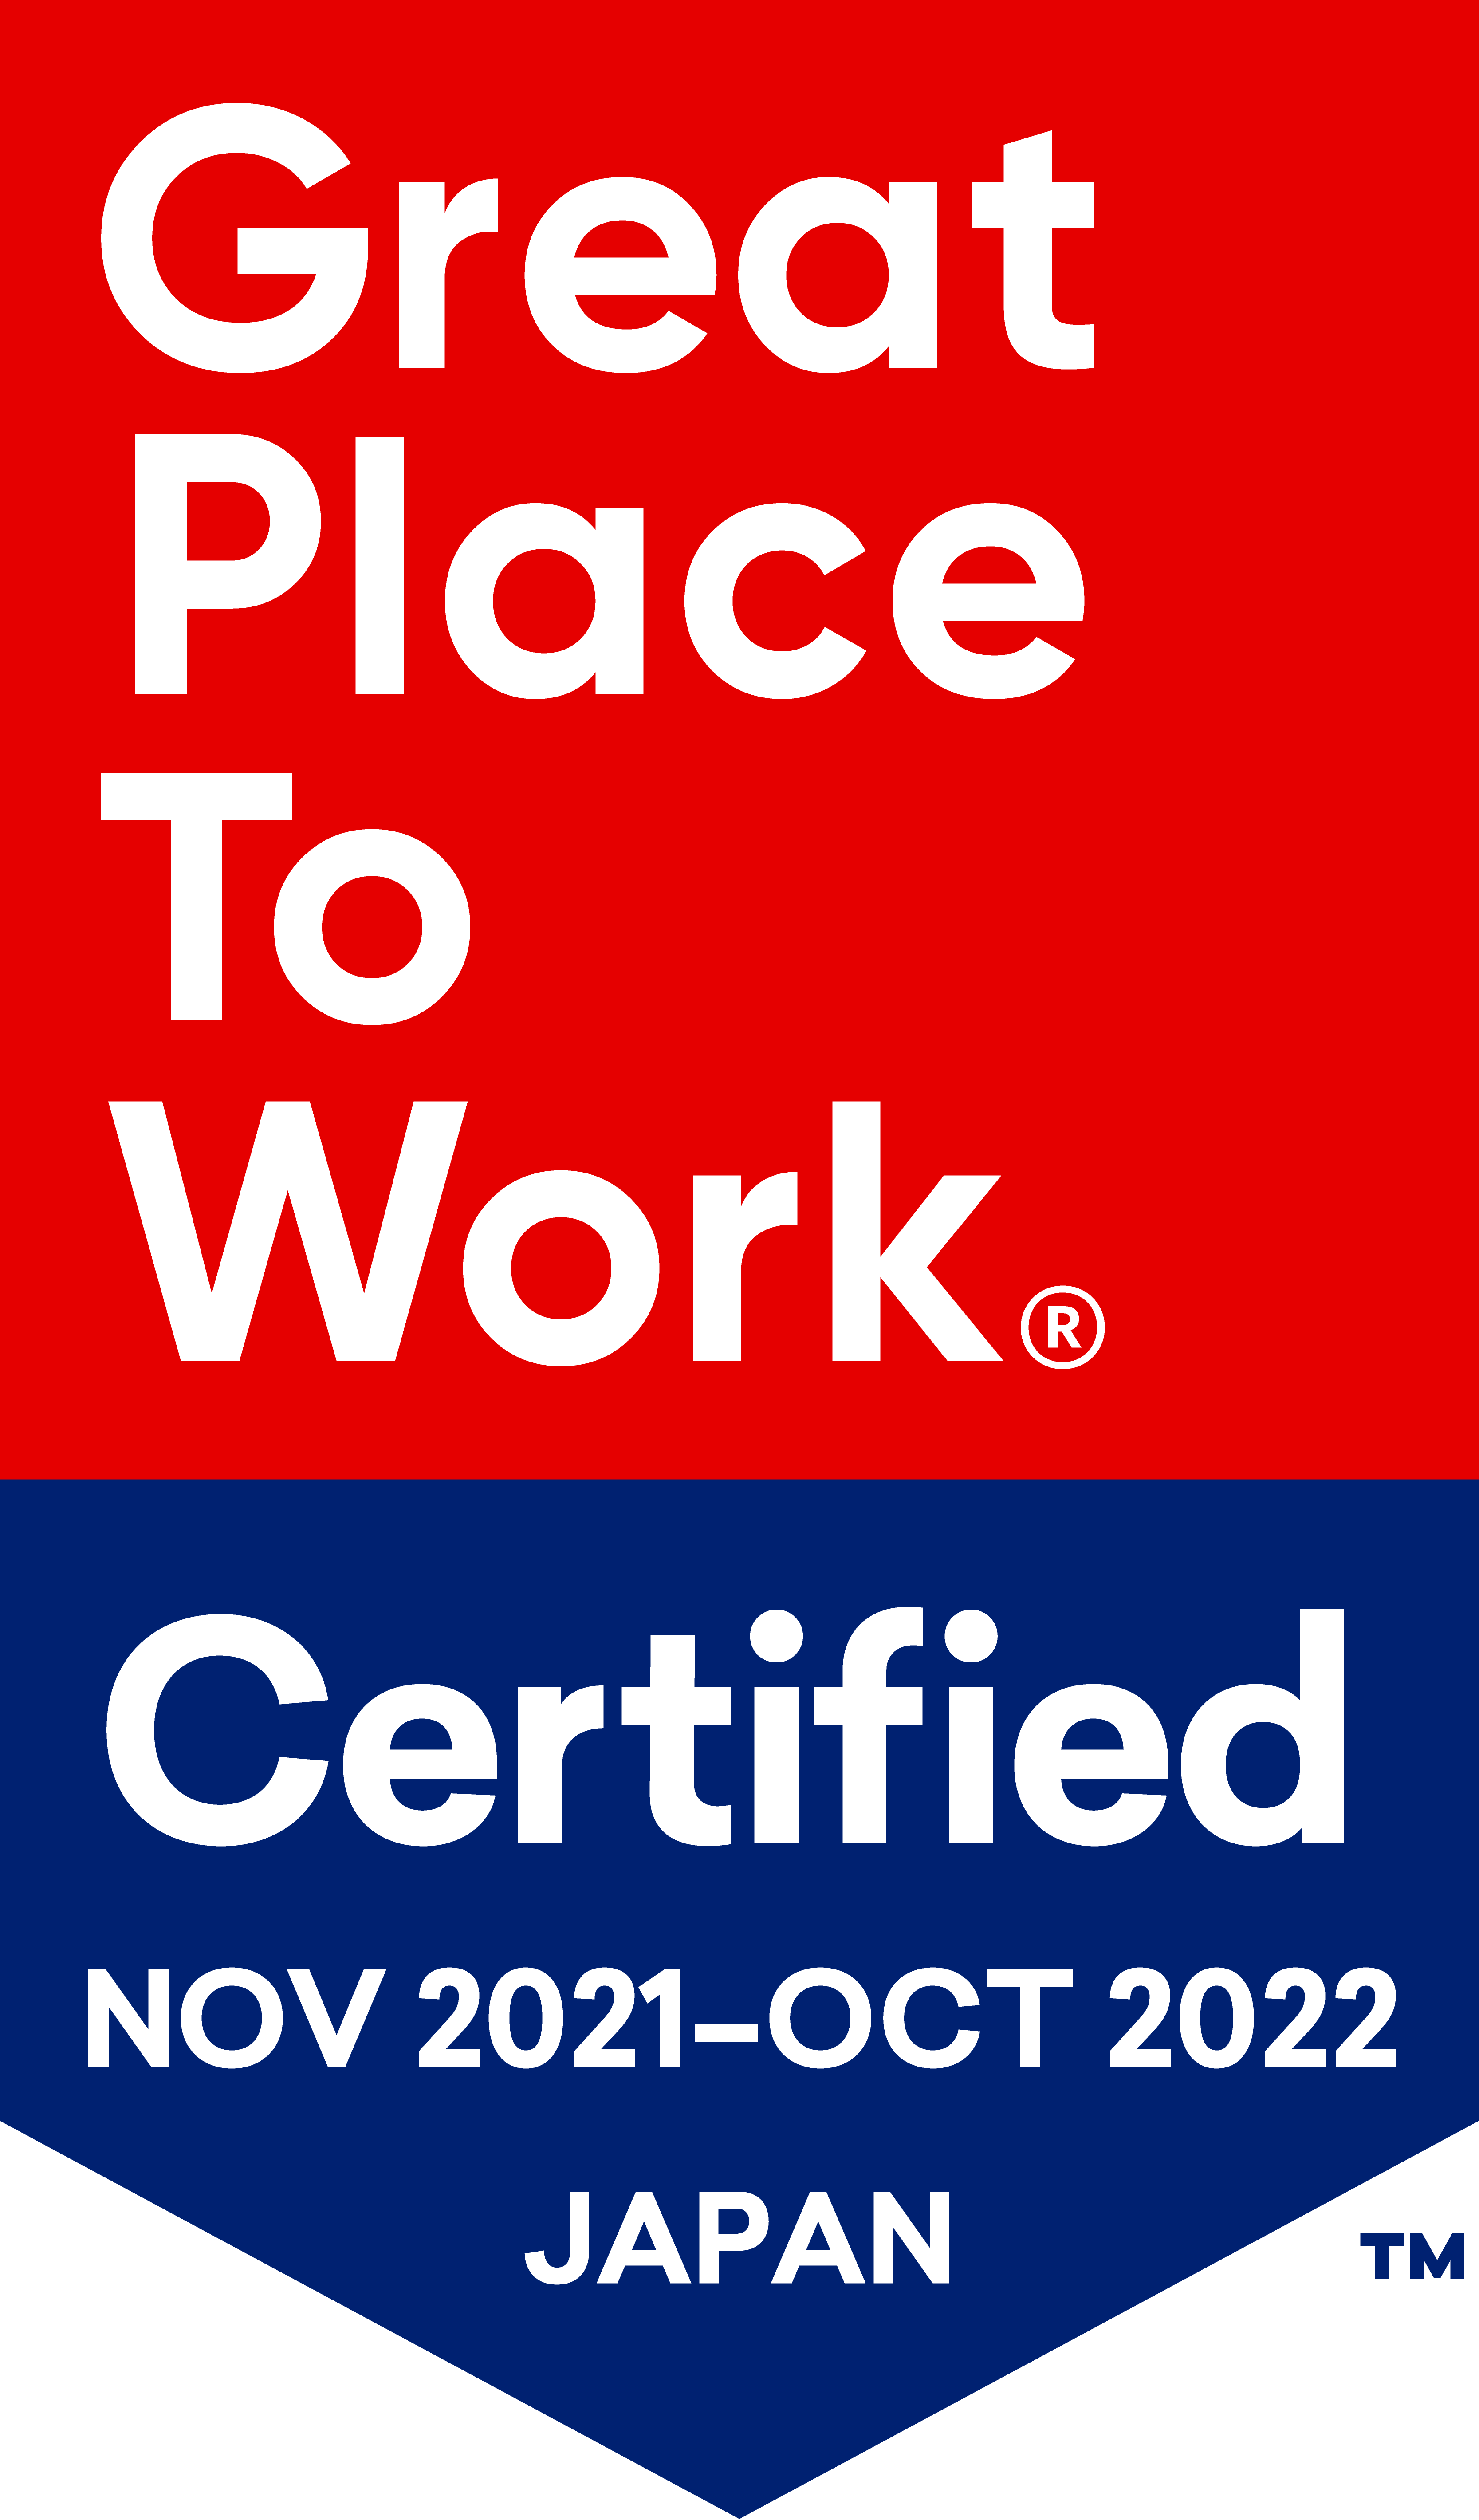 Great Place To Work Certified NOV 2021 - OCT 2022 JAPAN